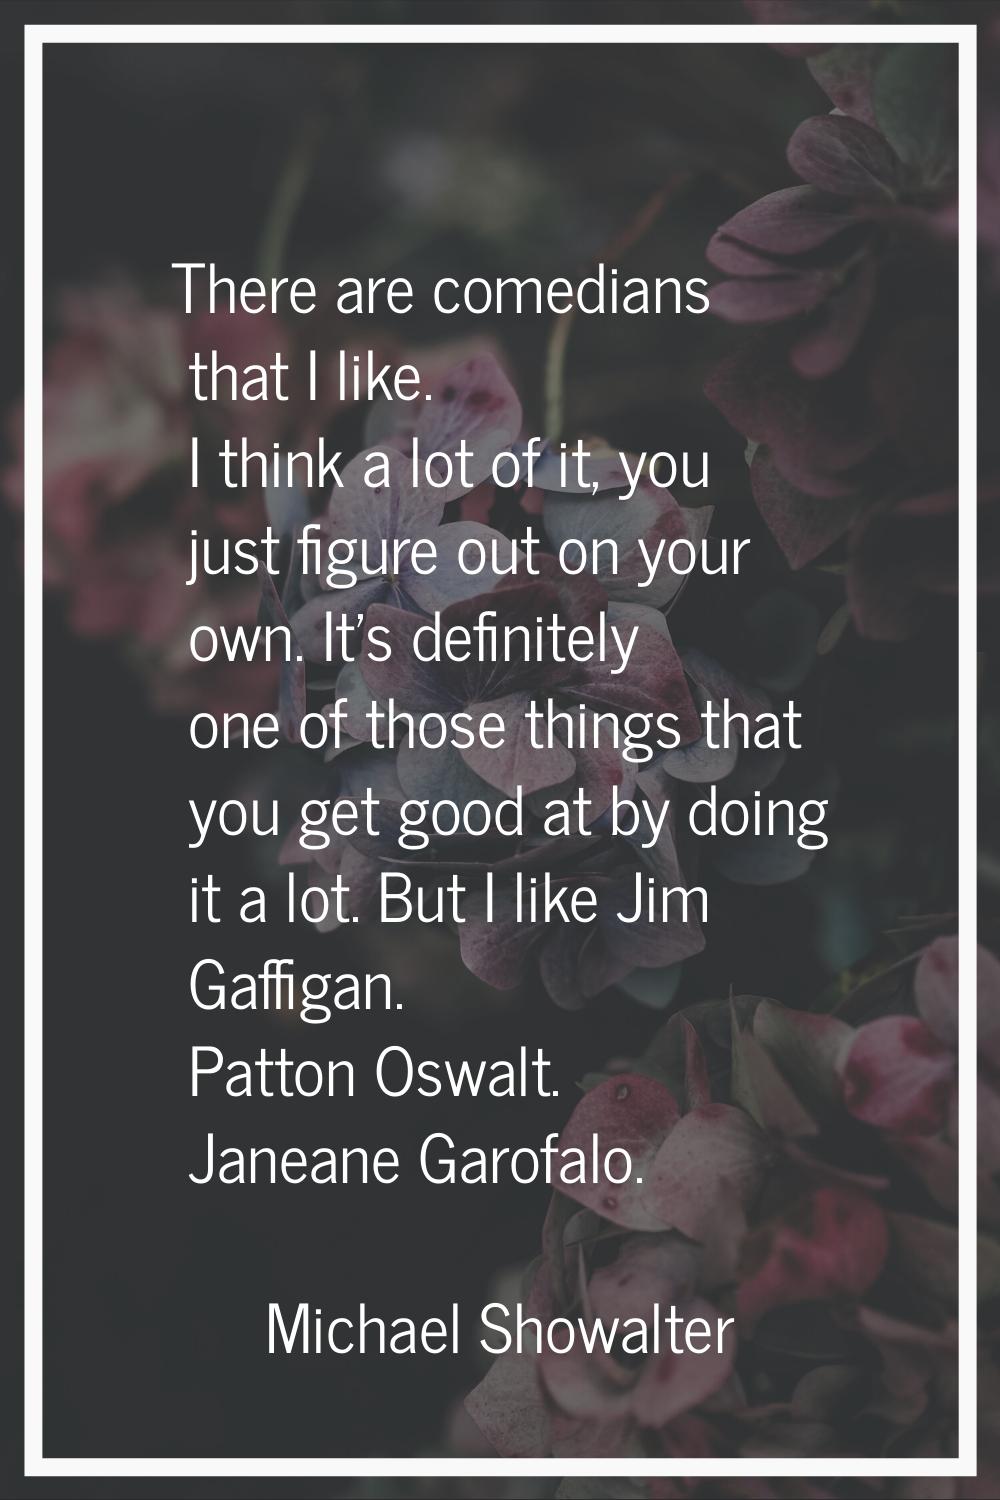 There are comedians that I like. I think a lot of it, you just figure out on your own. It's definit